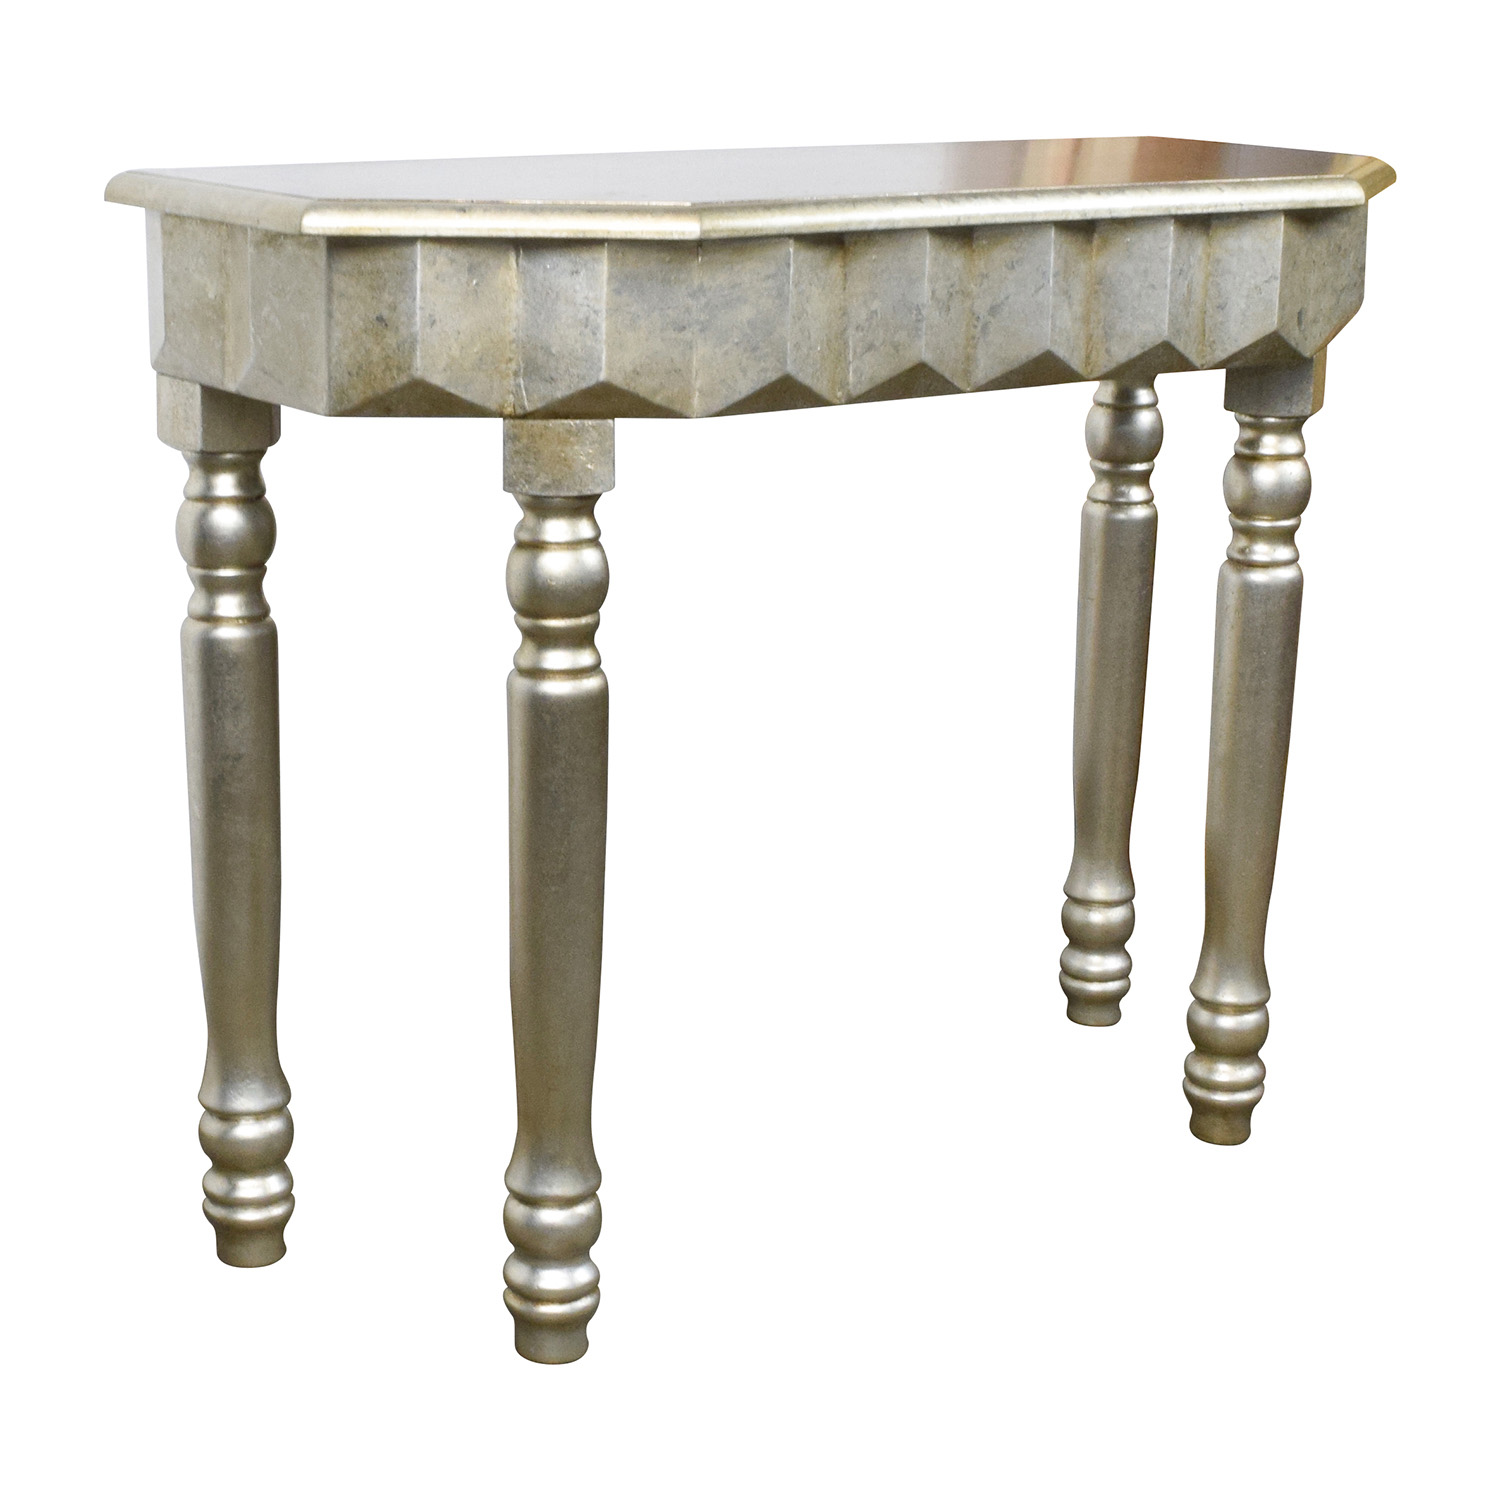 off rustic gold metallic console table tables used accent round patio cover drummer stool with backrest retro couch small screw legs light floor lamp funky end elegant placemats